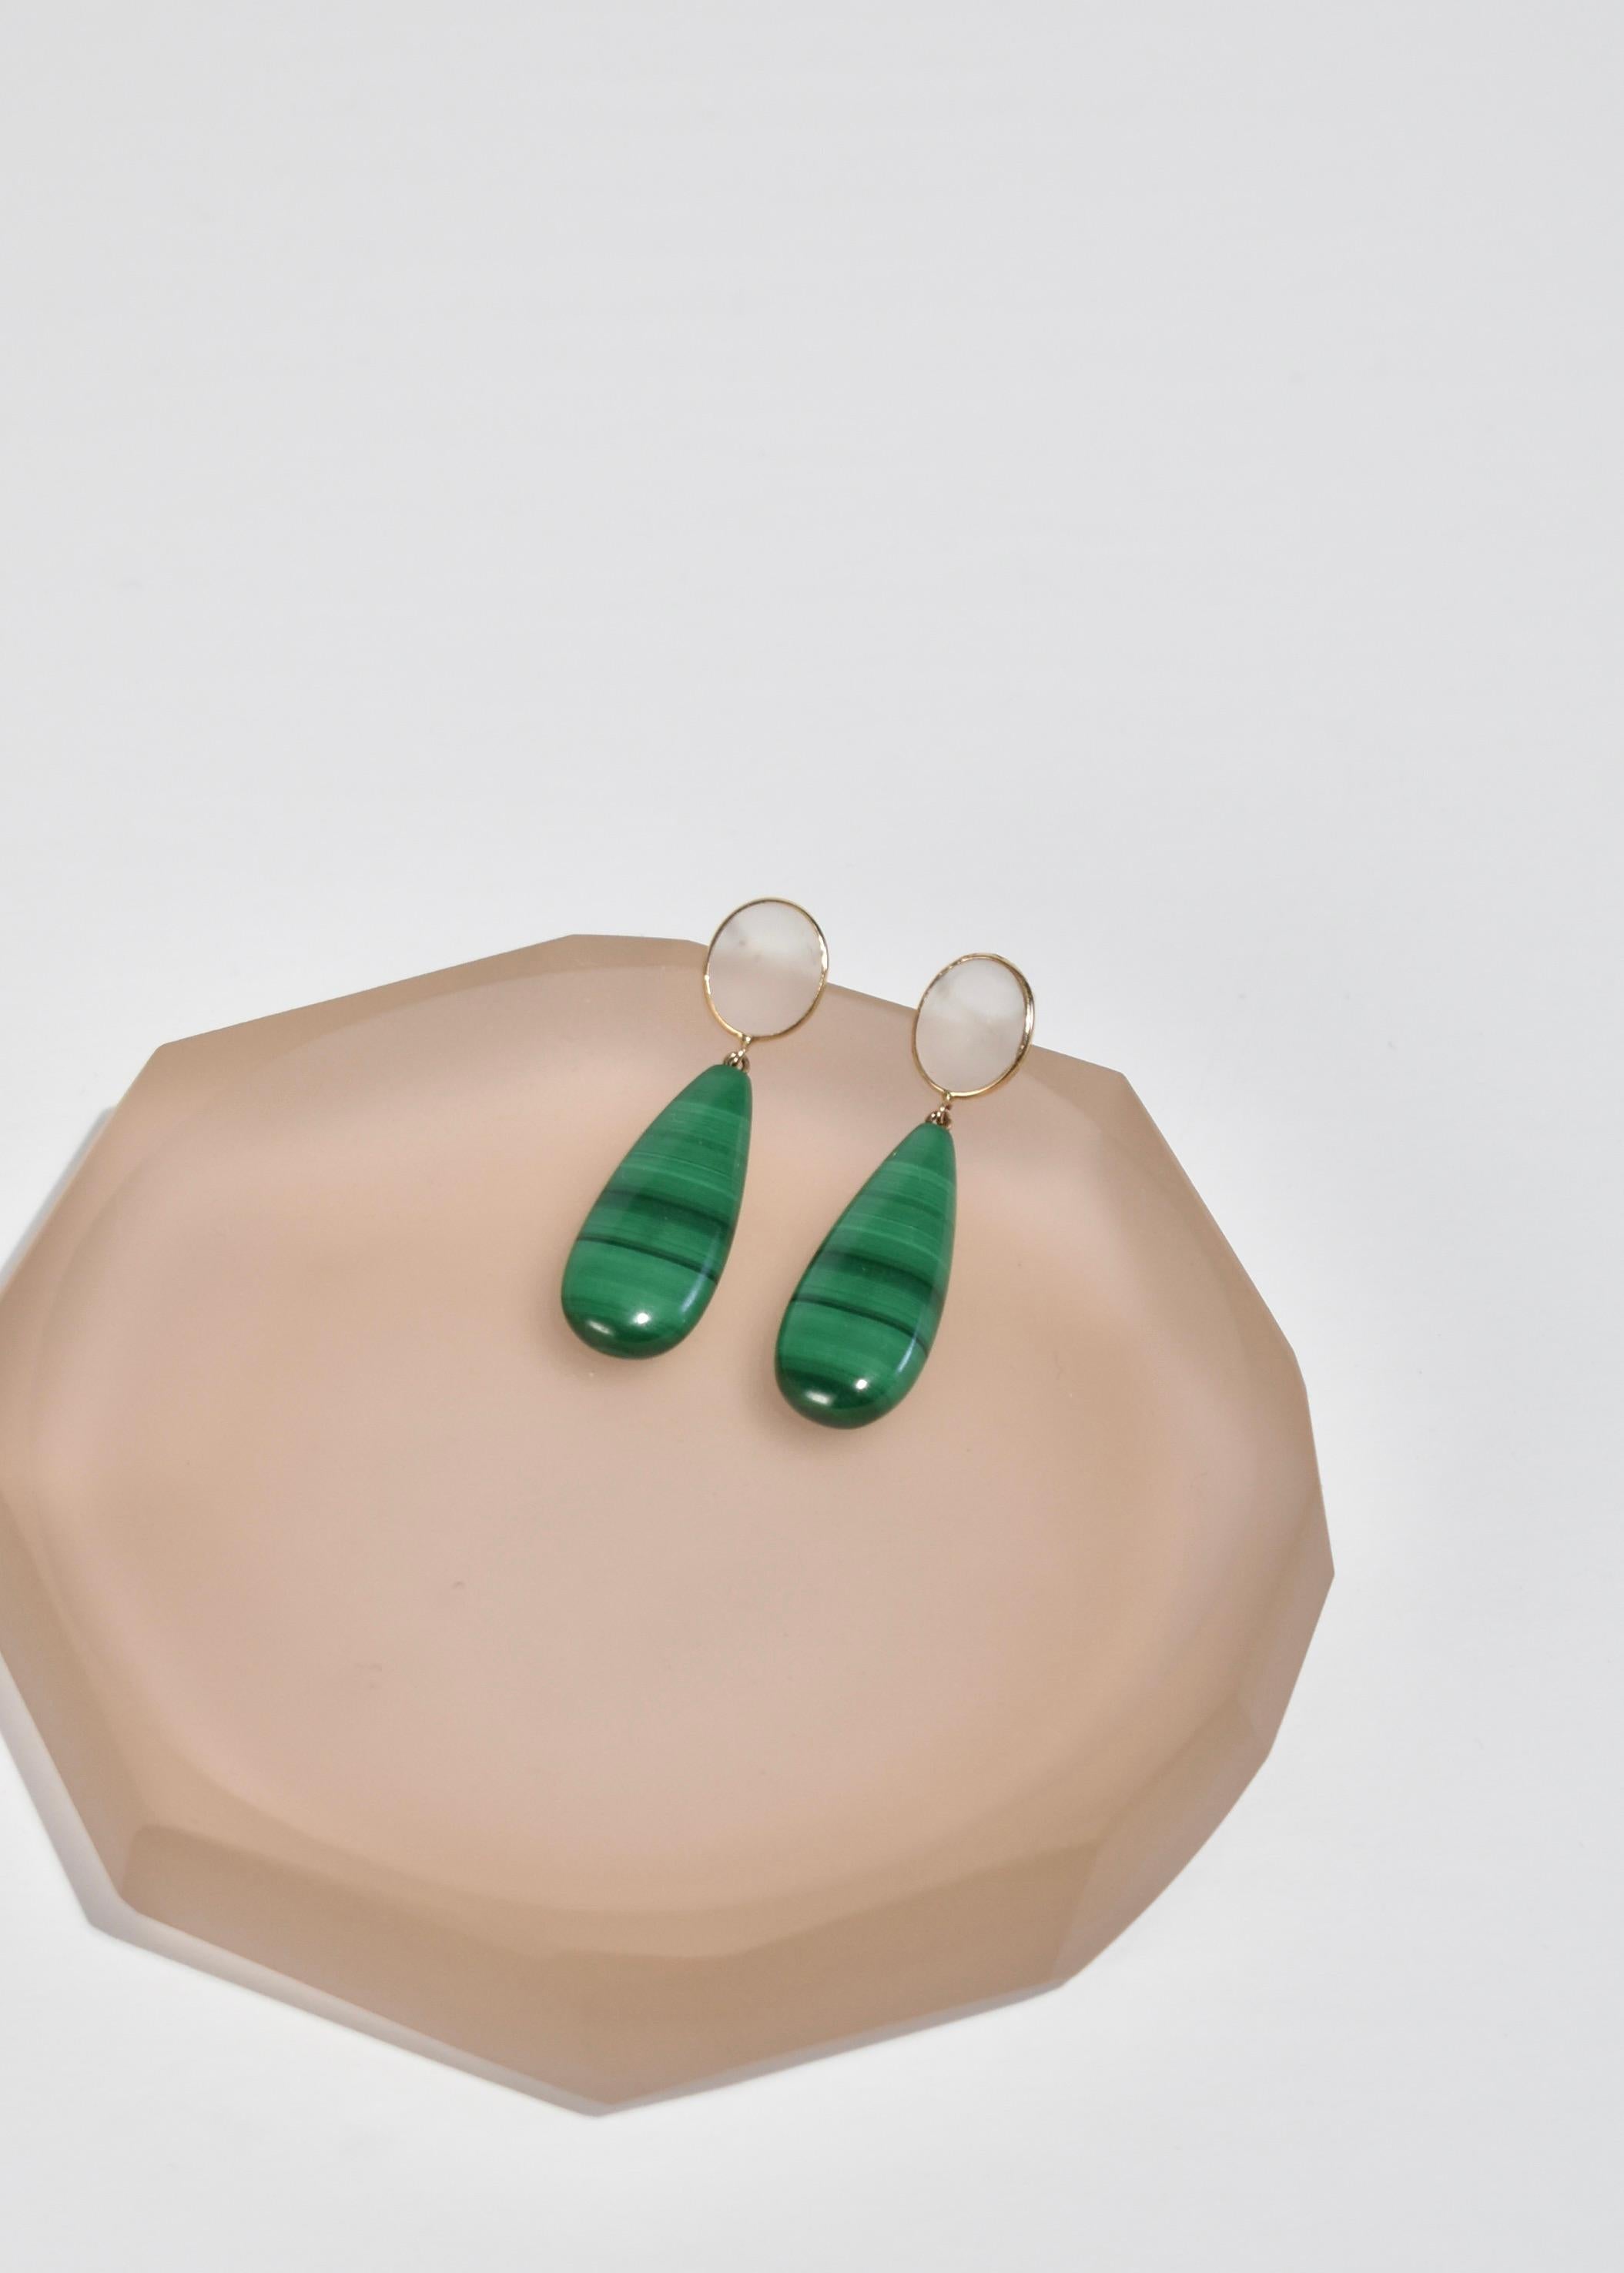 Cabochon Crystal Malachite Earrings For Sale